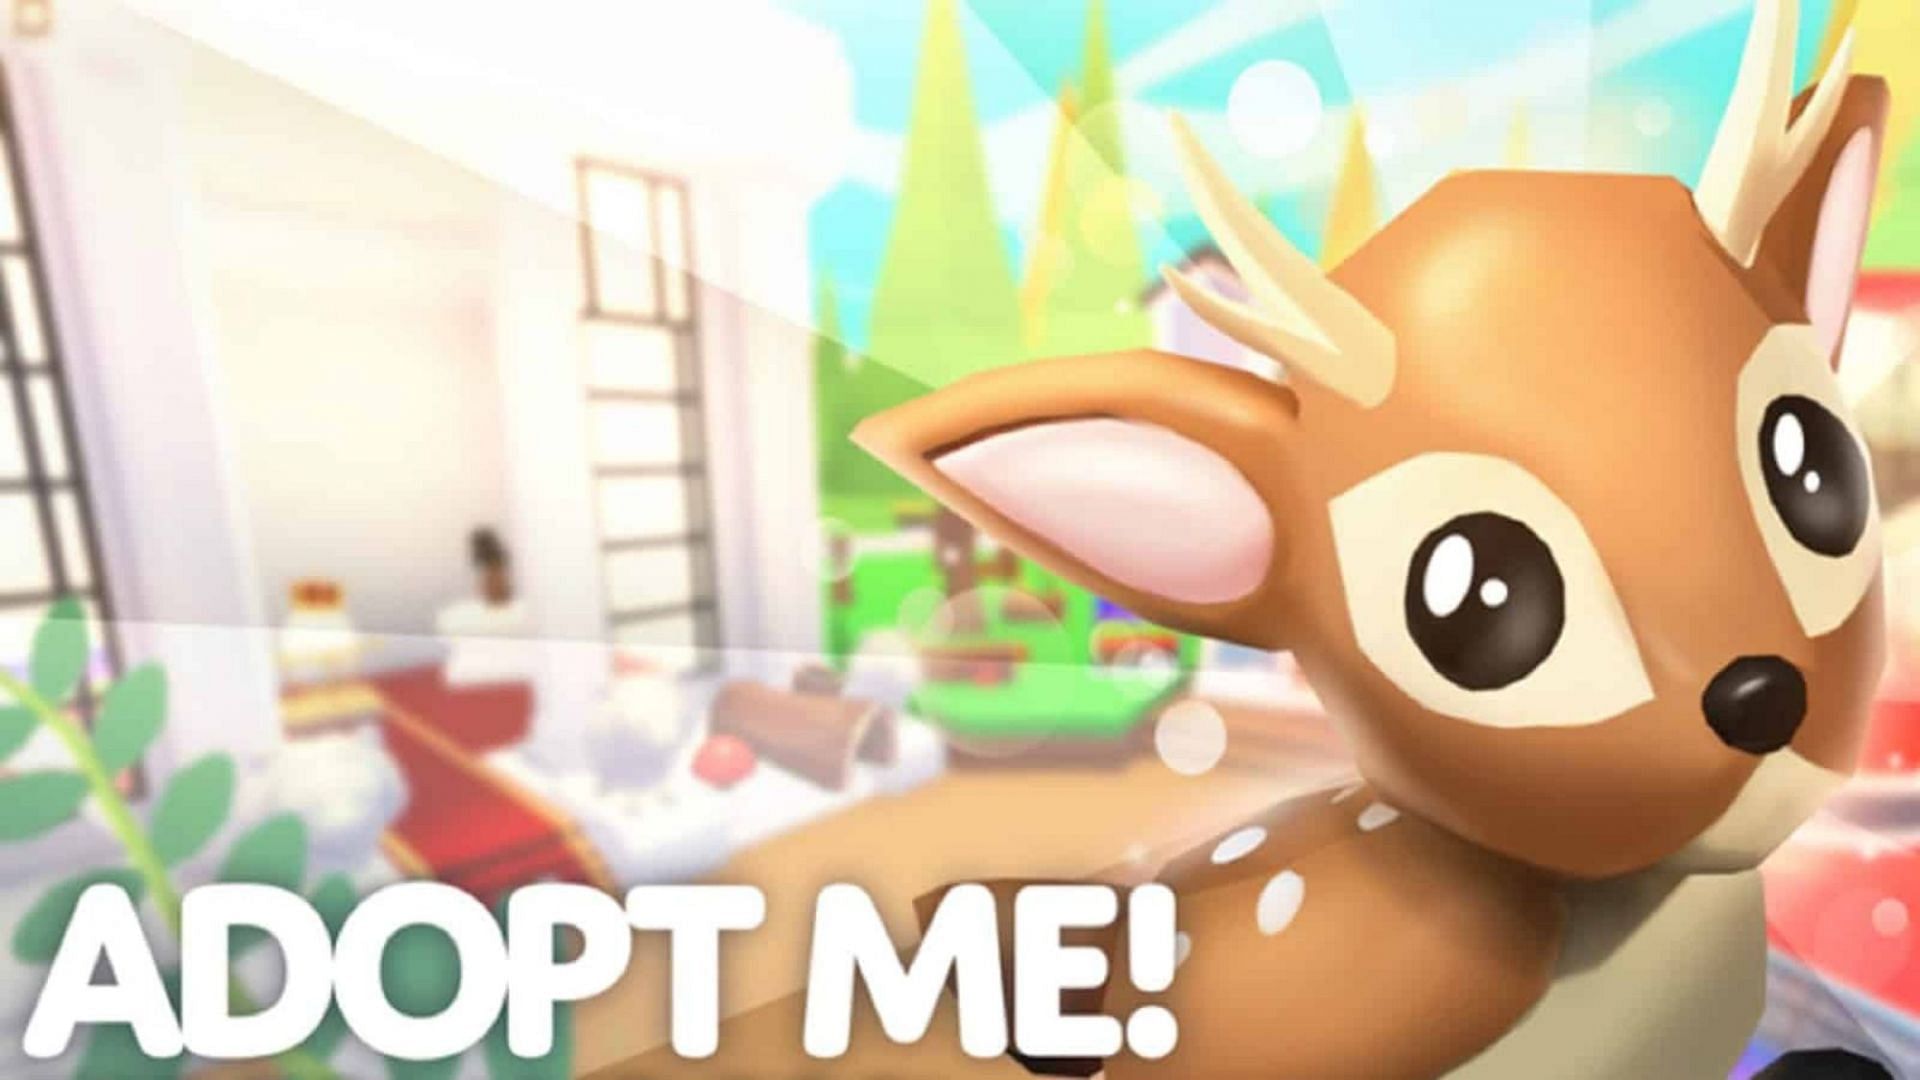 Free Pets in Roblox Adopt Me! (Image via Roblox)